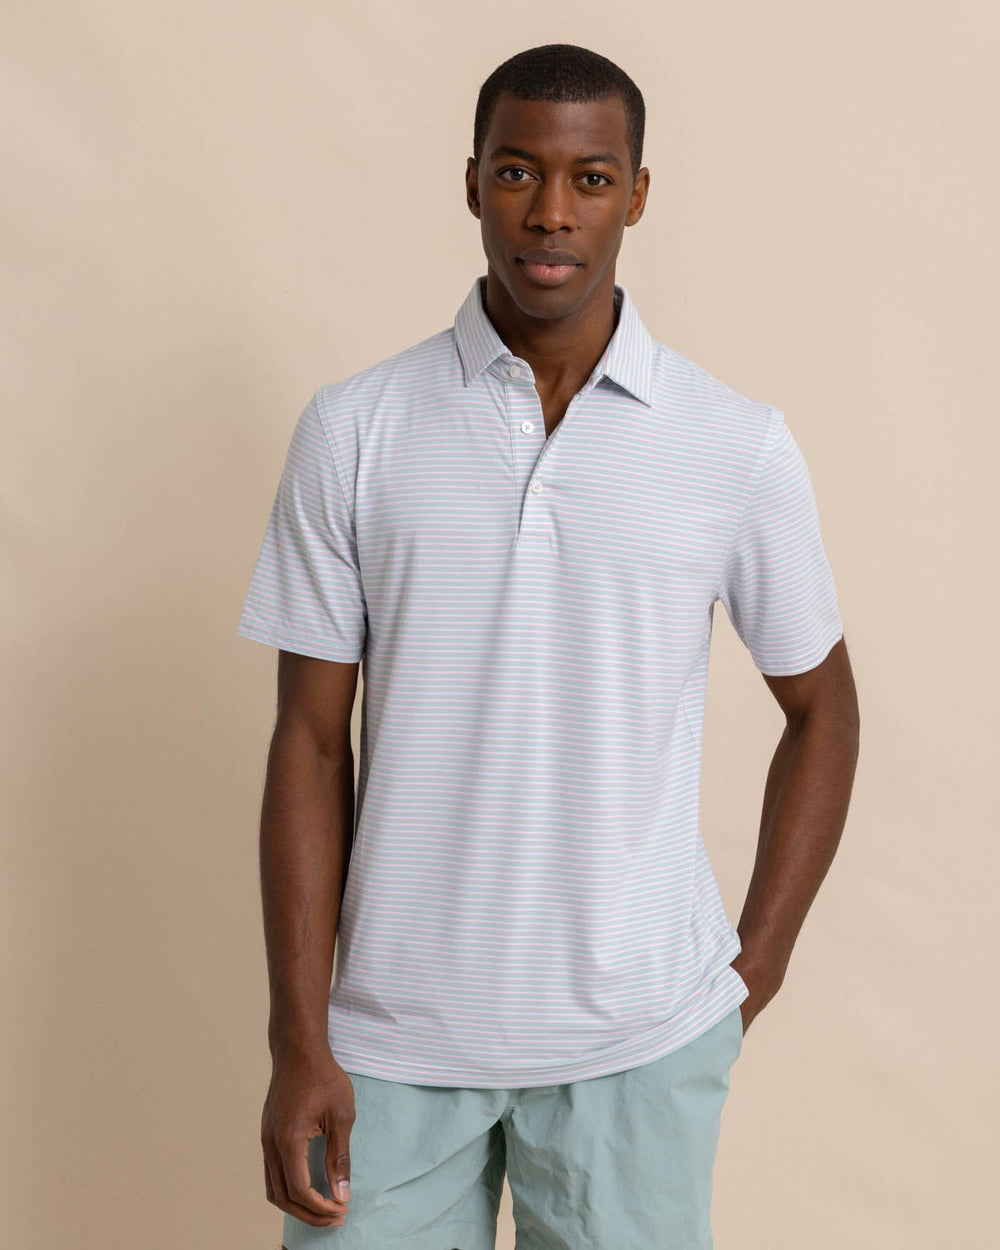 The front view of the Southern Tide Ryder Heather Halls Performance Polo by Southern Tide - Heather Wake Blue